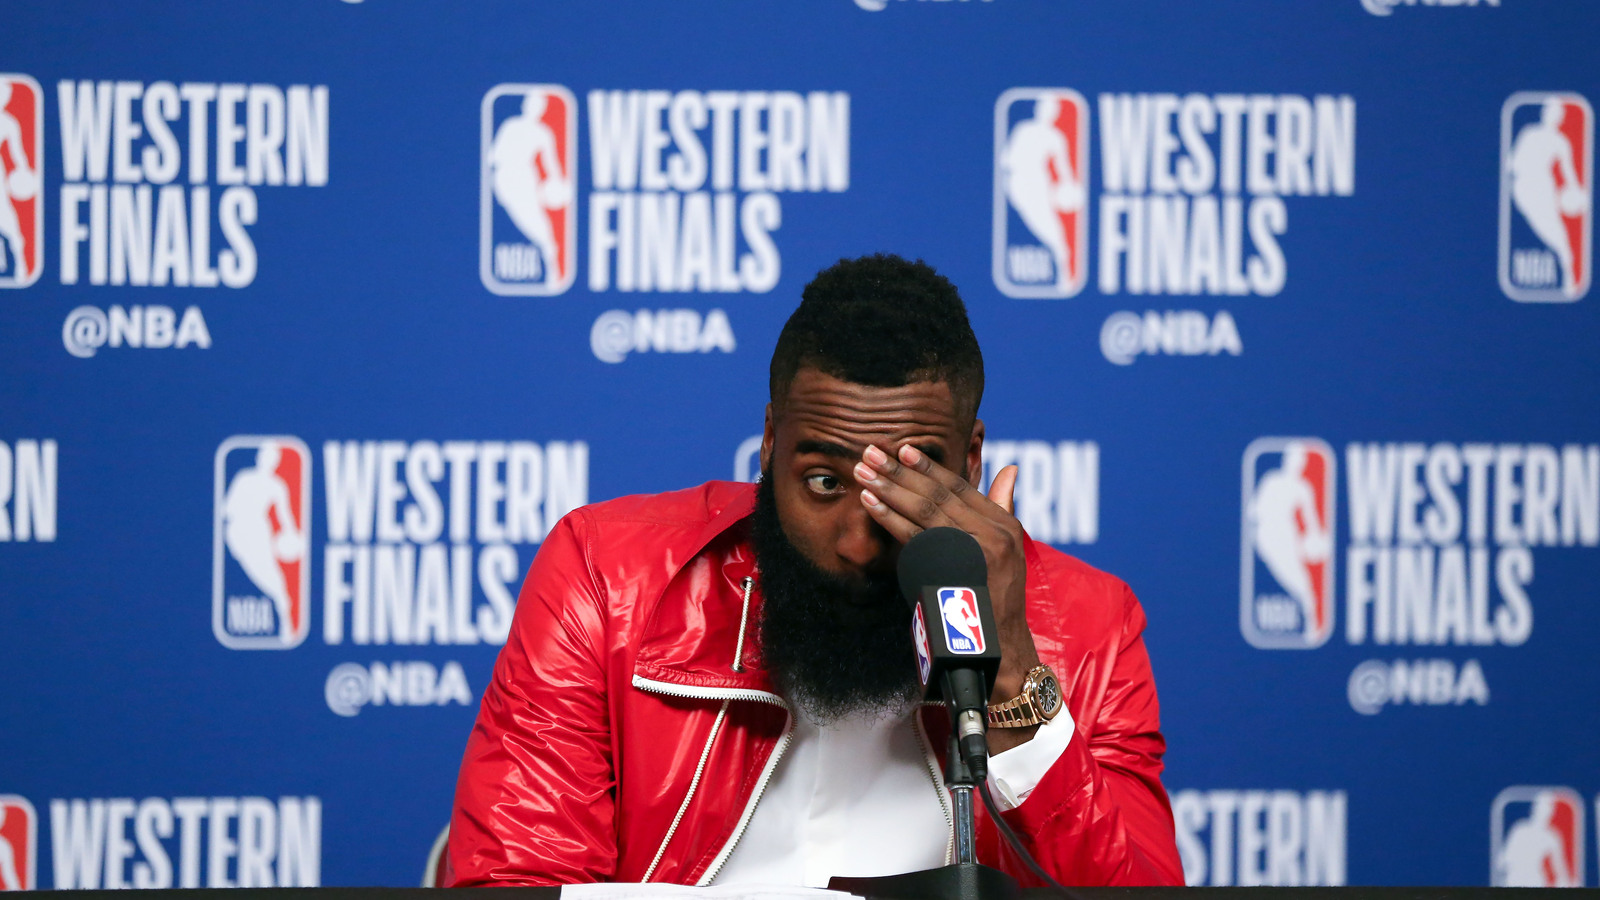 LeBron James recalls Rockets missing 27 three-point shots in a row during 2018 Western Conference Finals